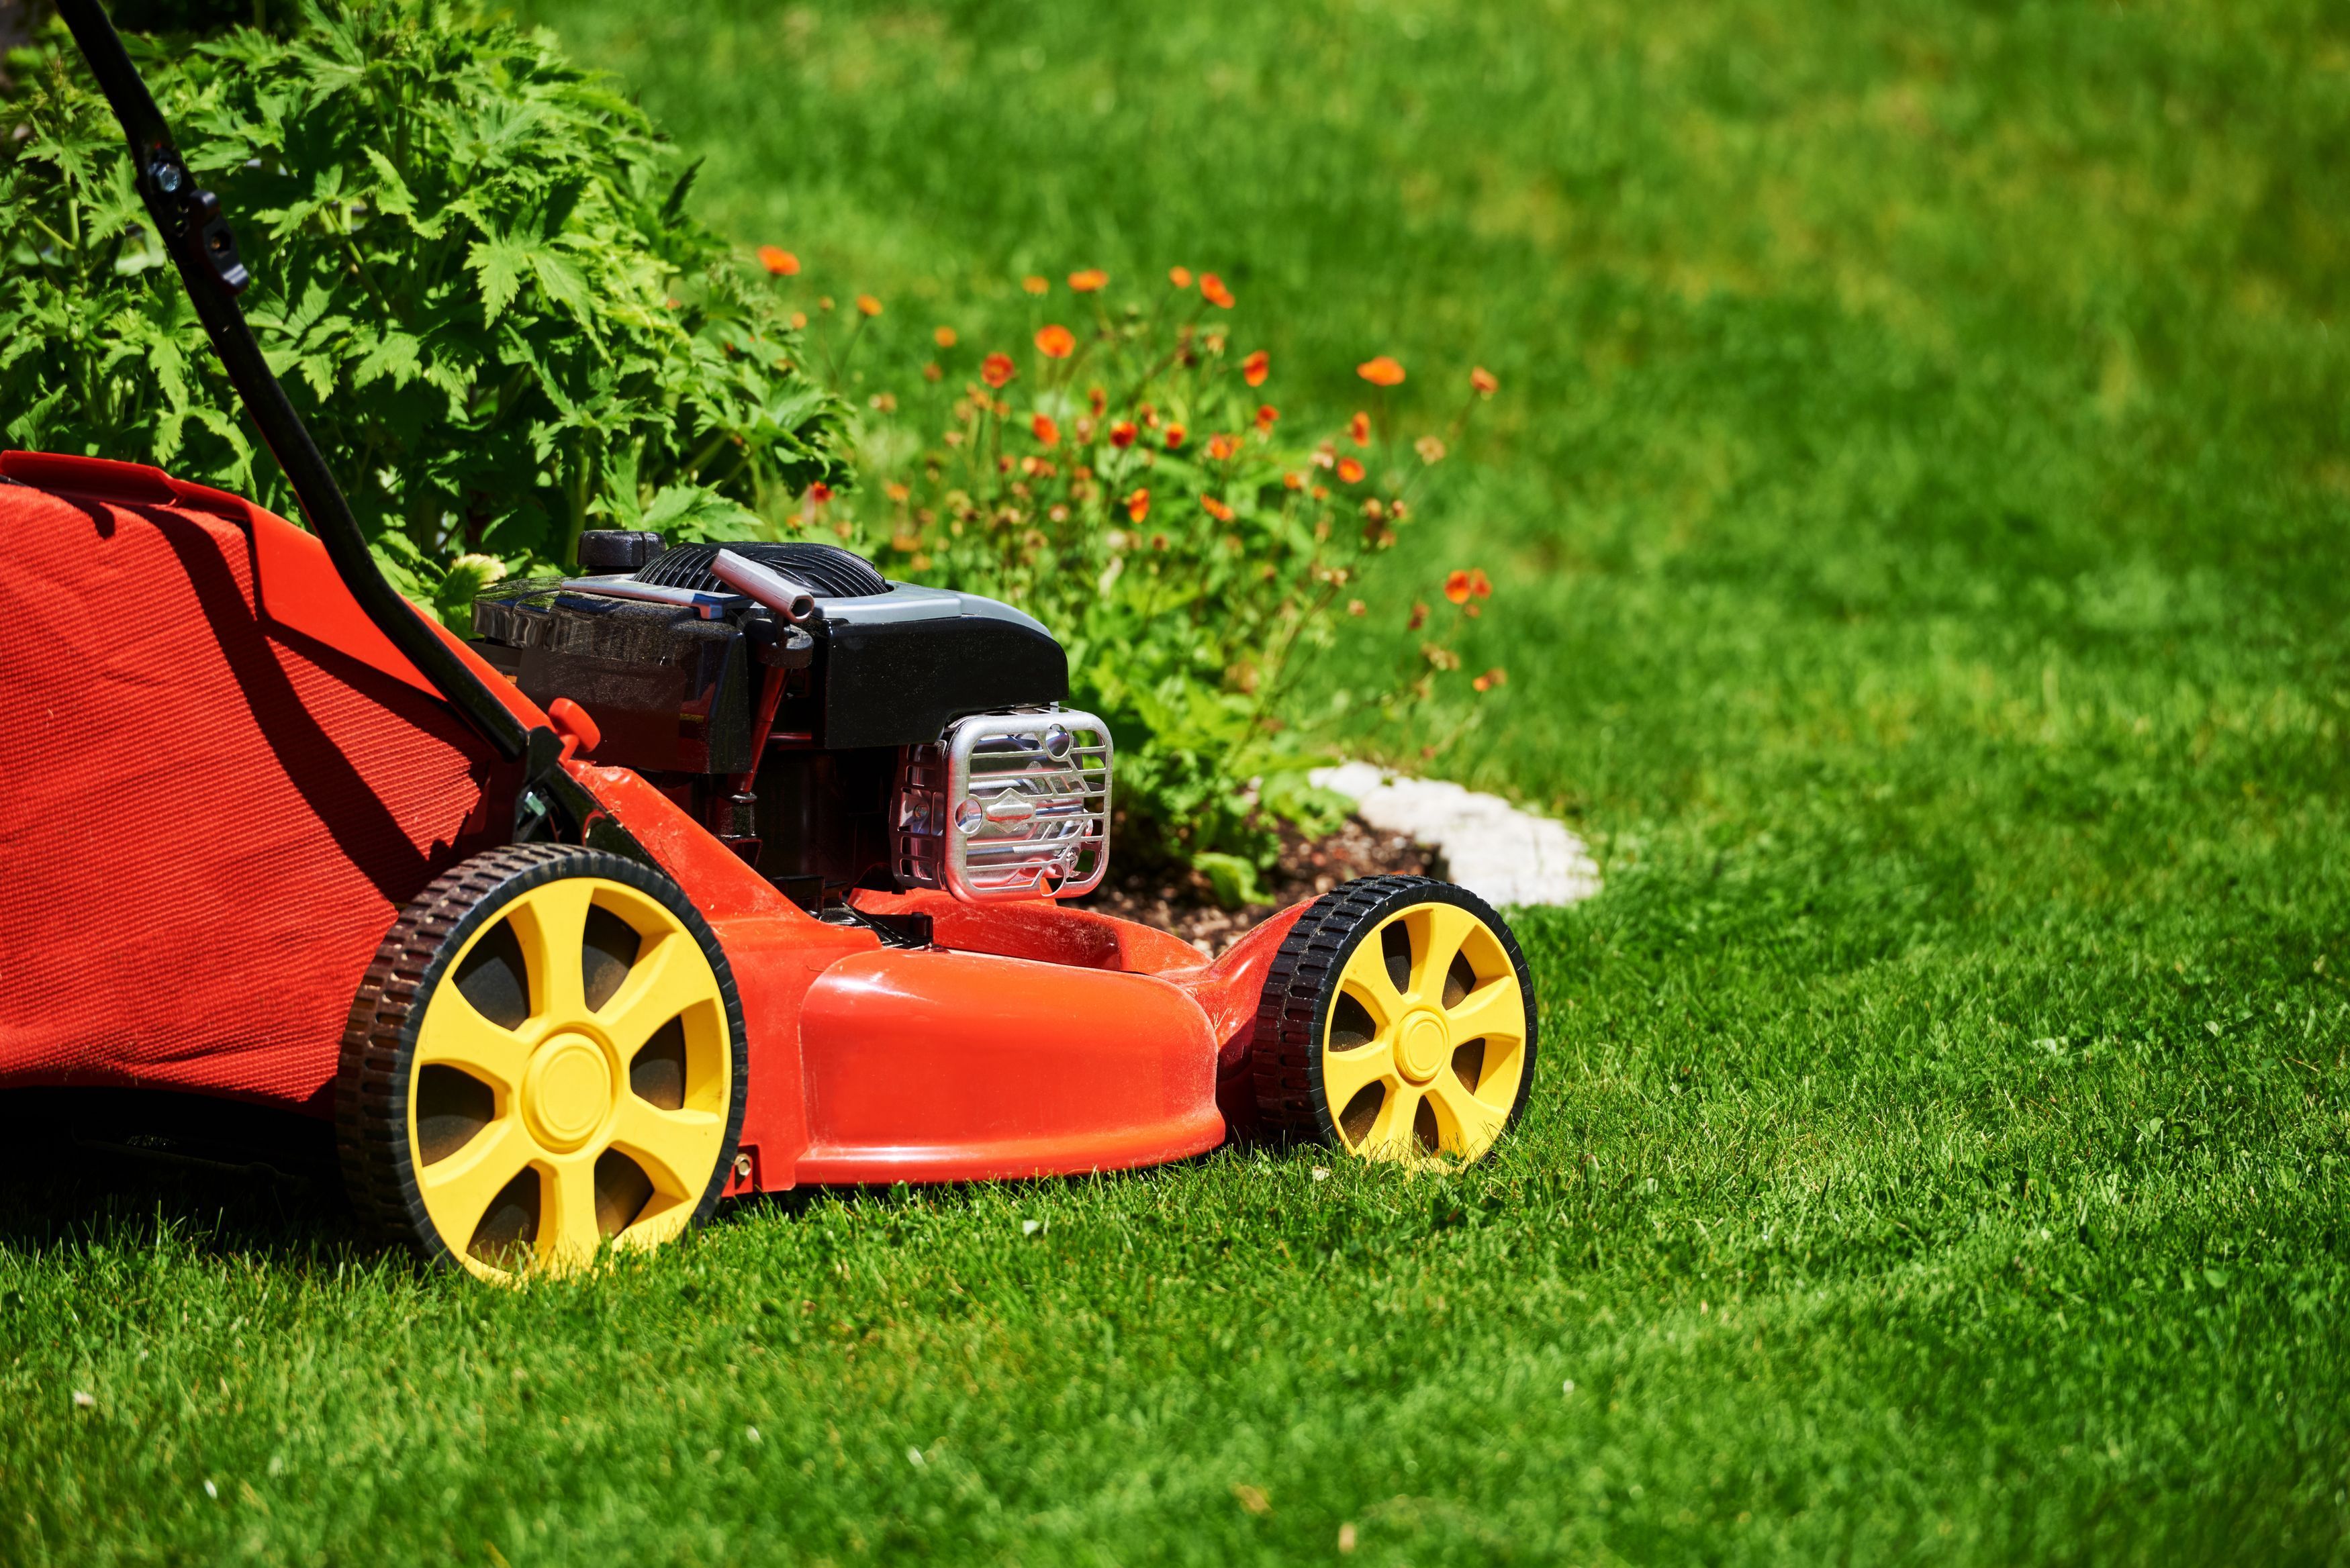 Mow when the grass is actively growing. (Thinkstock/PA)